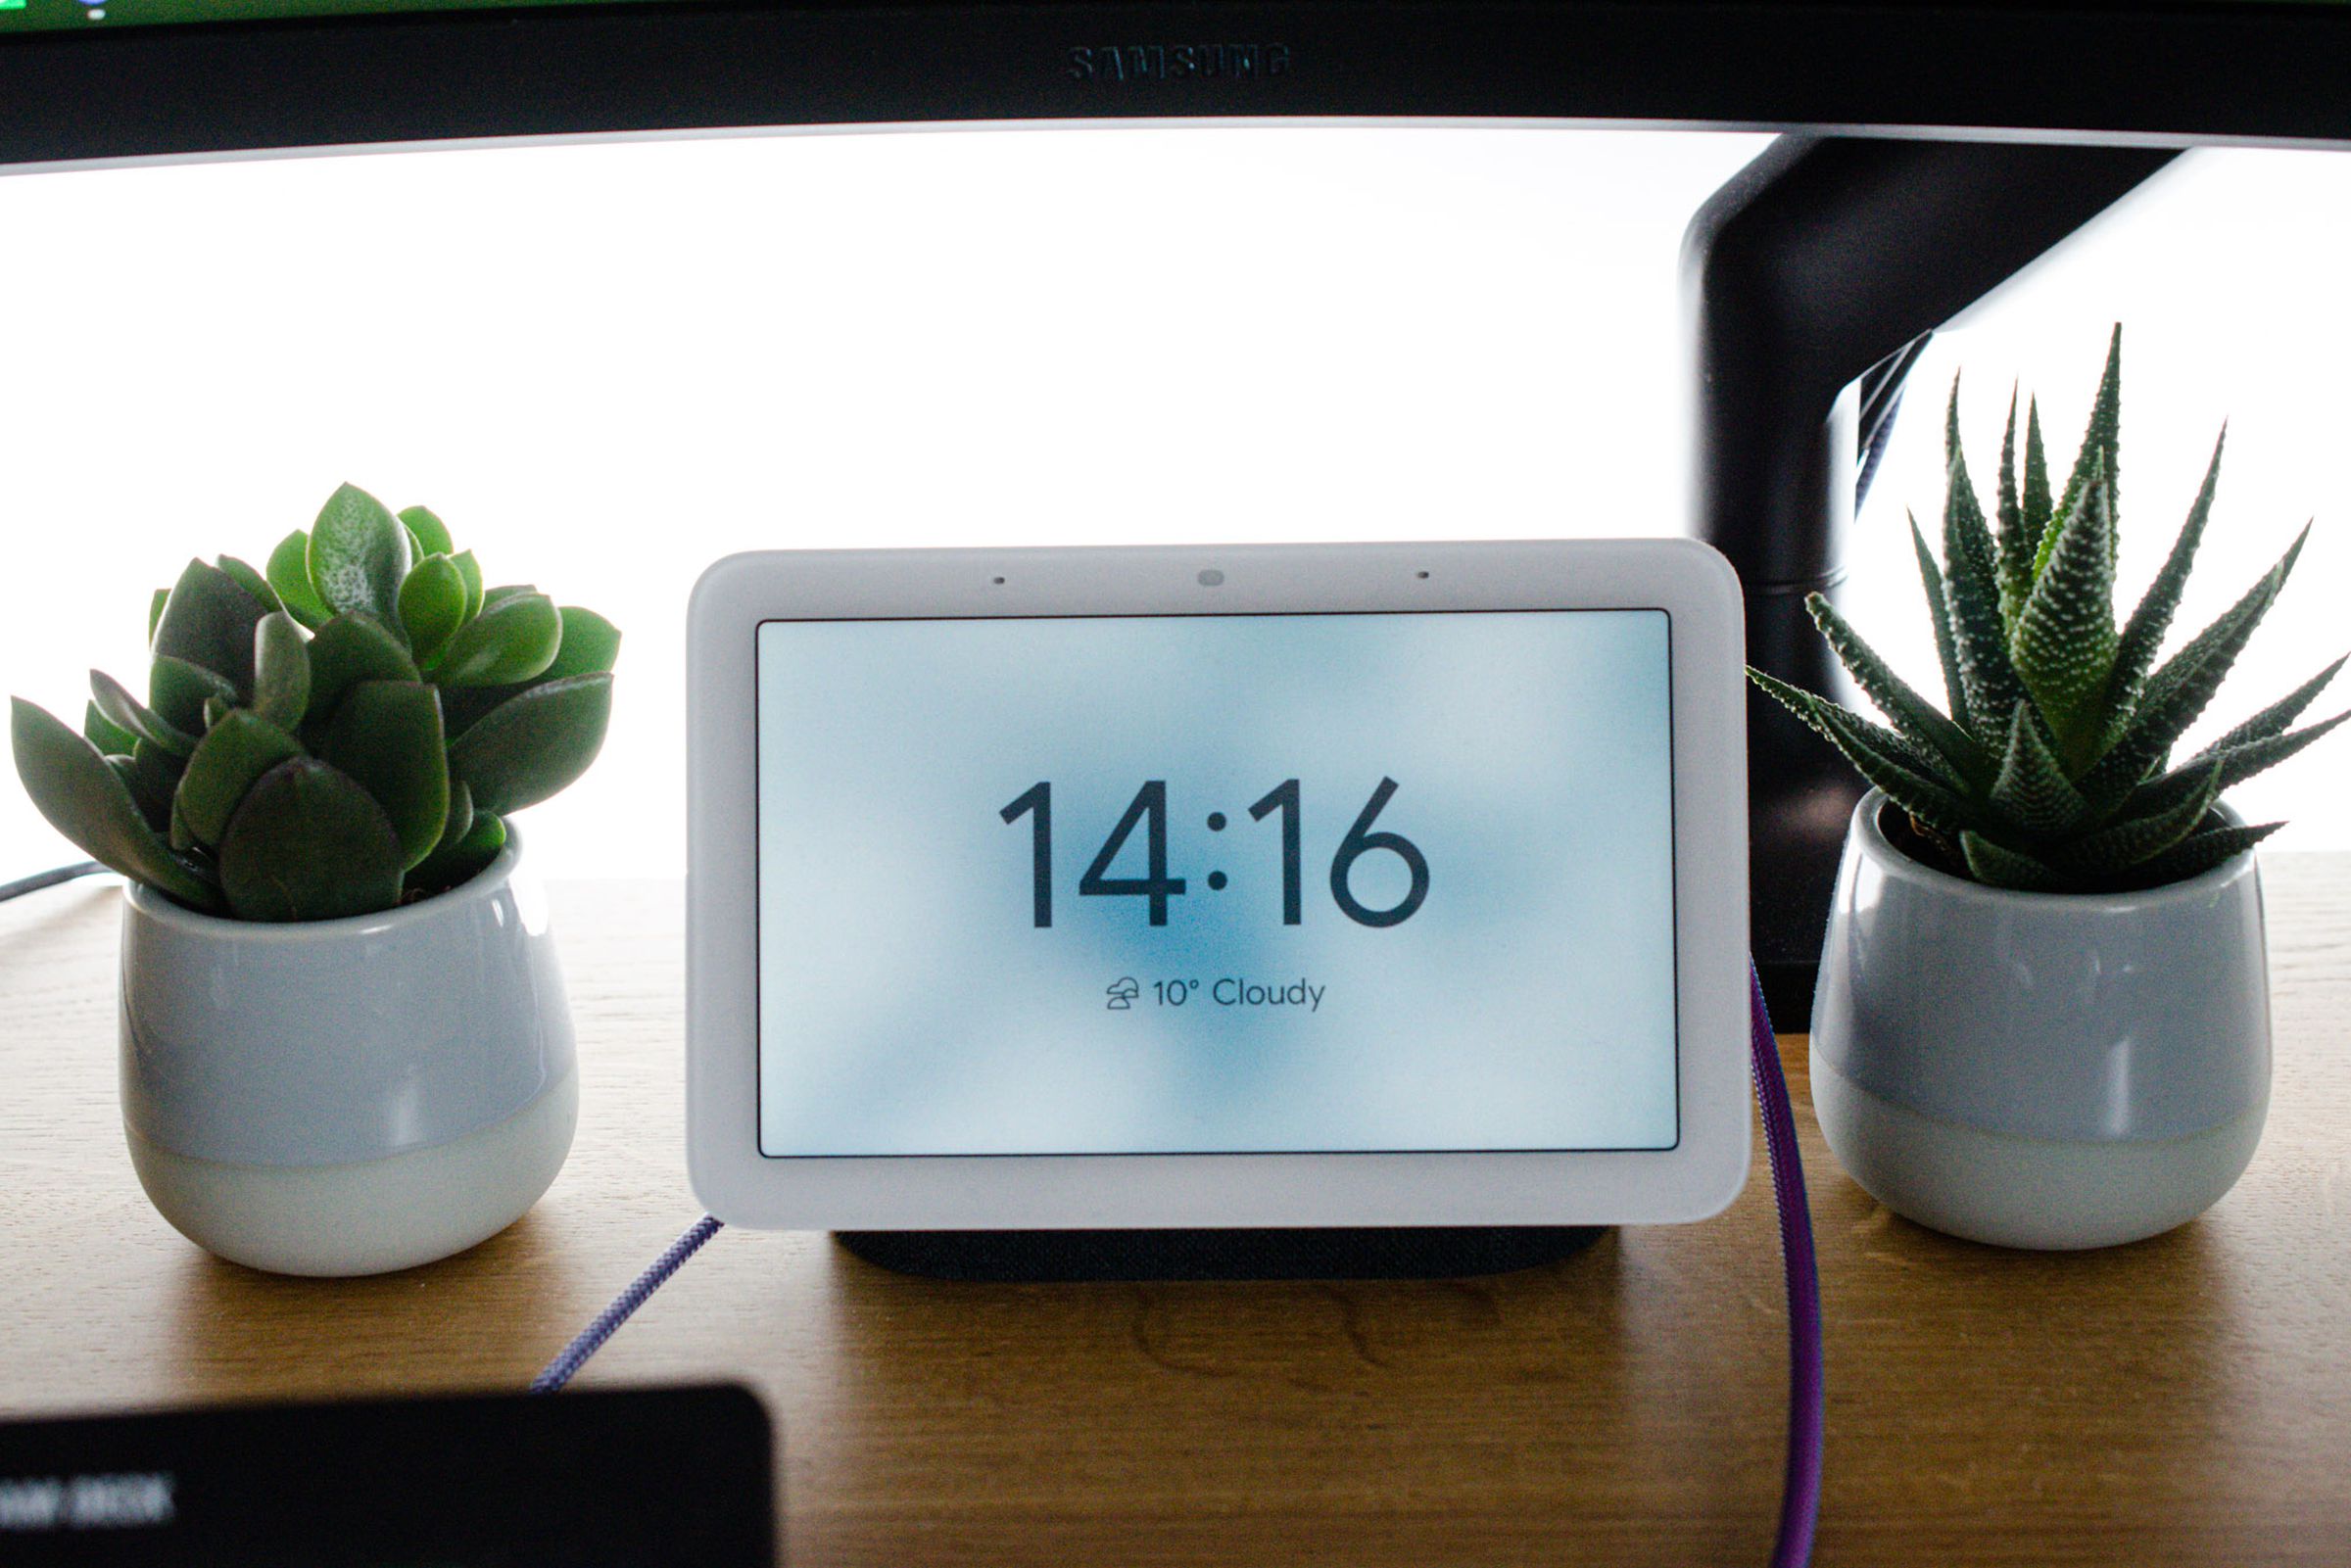 A Google Nest hub showing the time. There are two small plants on each side.